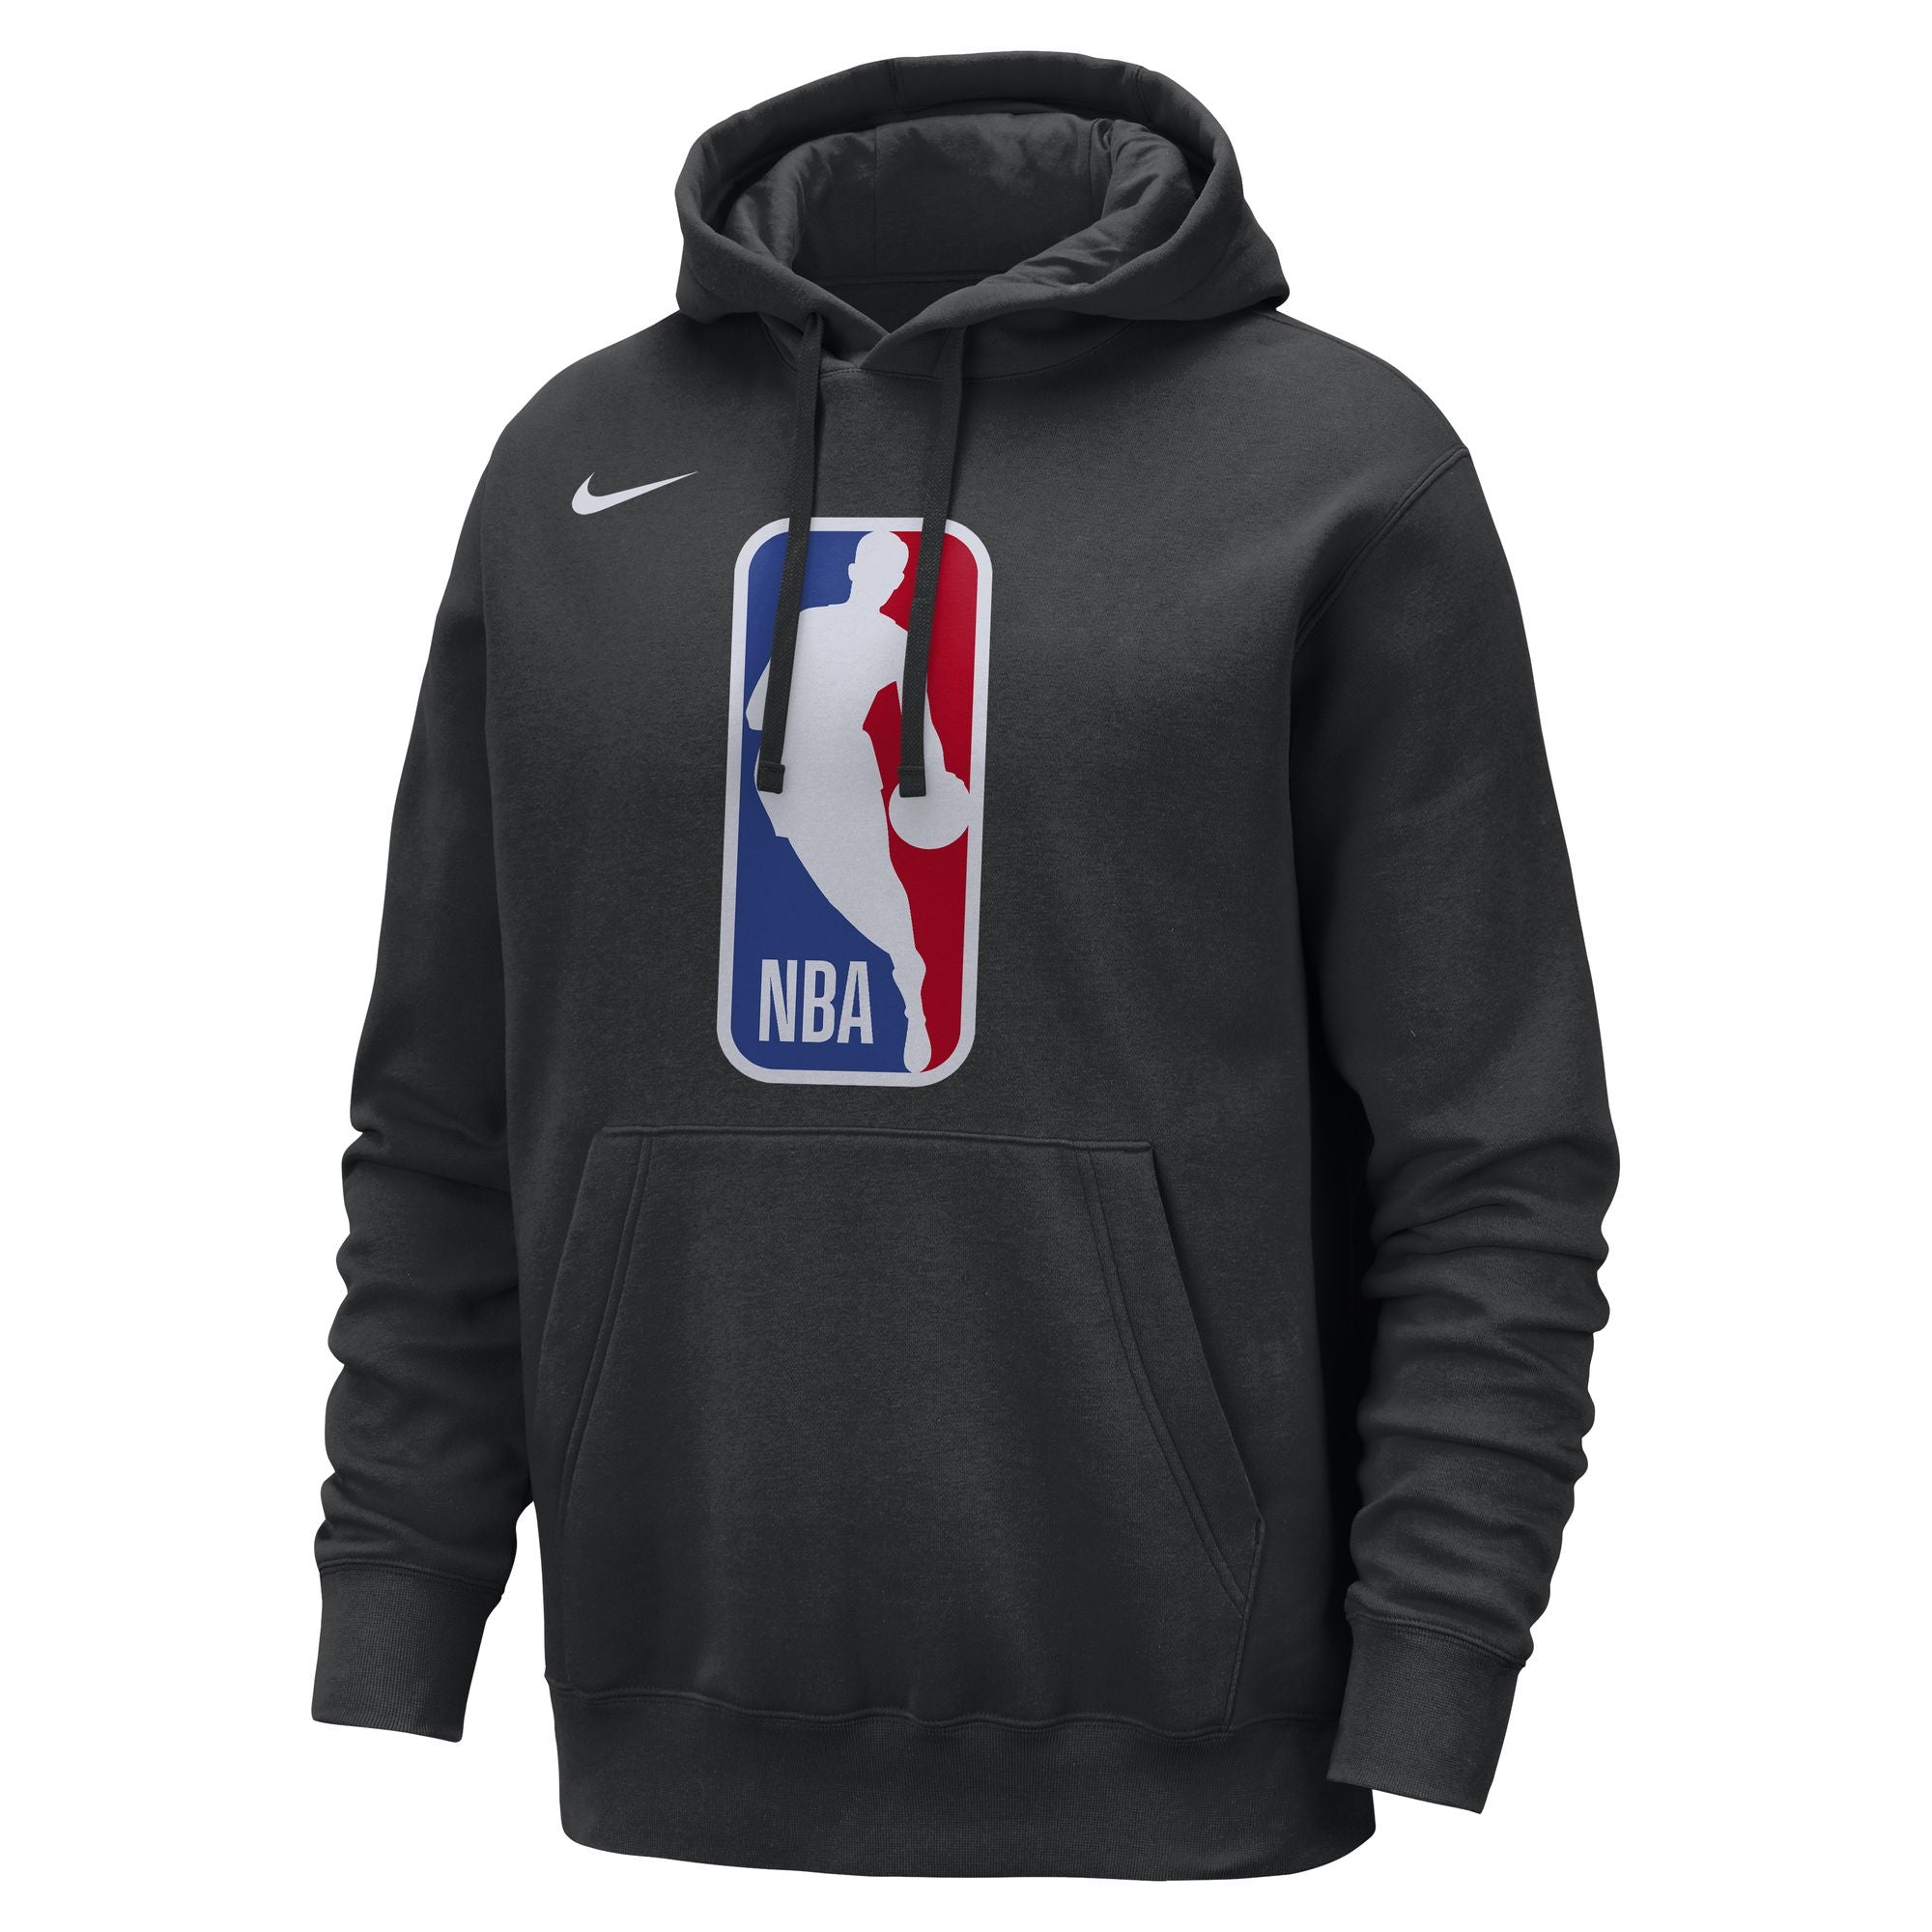 Nike NBA Club Pullover Hoodies Show your love for your squad in